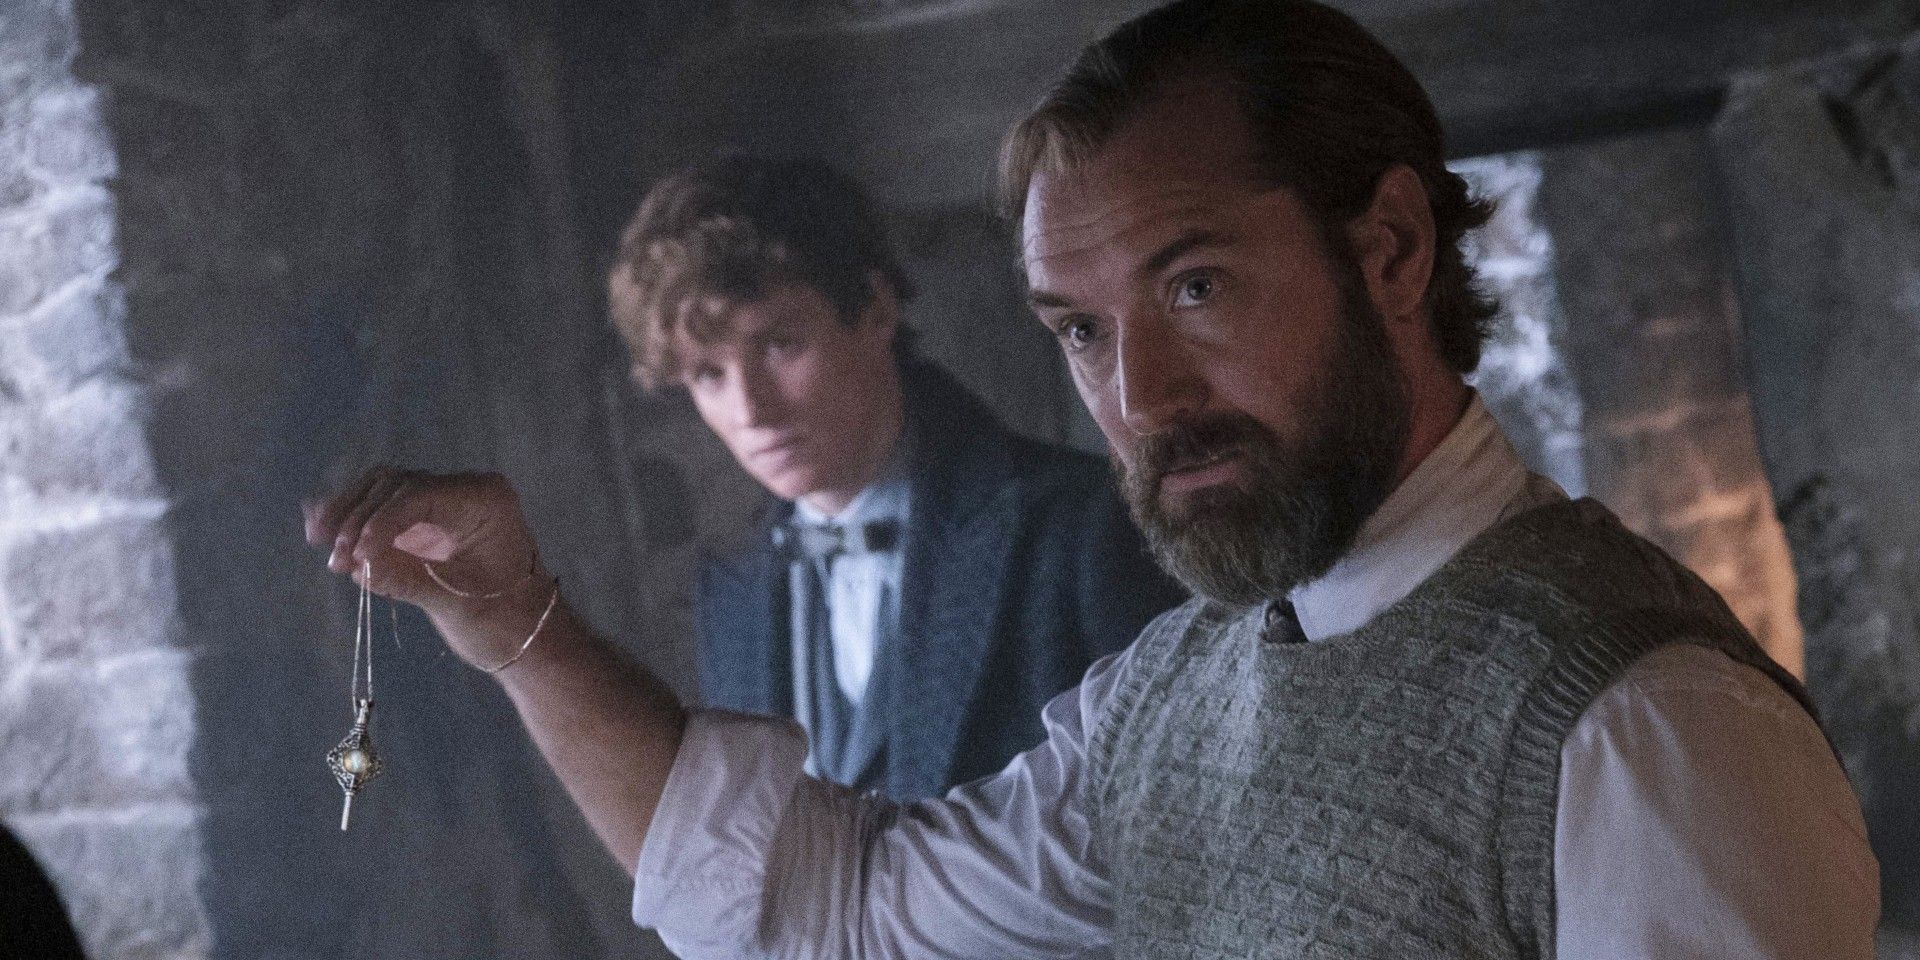 Eddie Redmayne and Jude Law in Fantastic Beasts The Secrets of Dumbledore